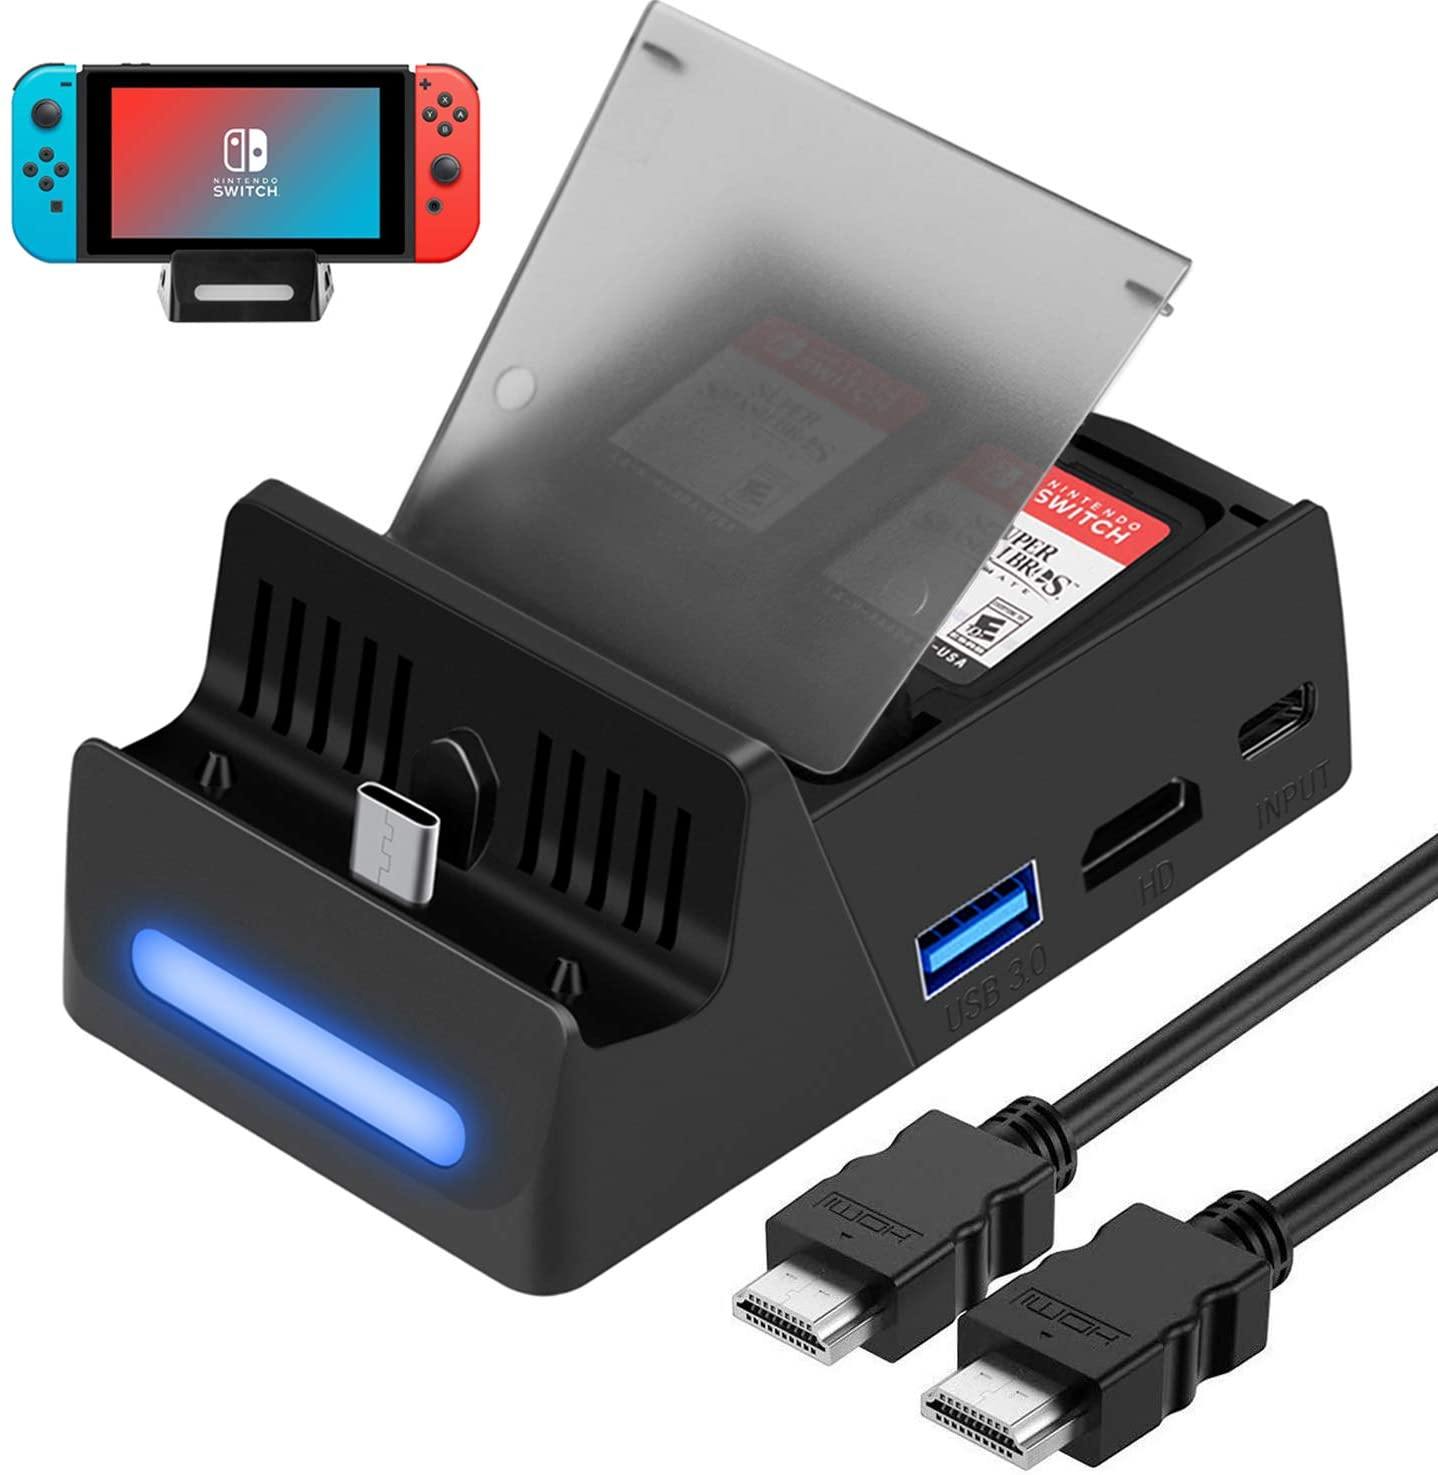 Buy Charge Dock Online In Usa